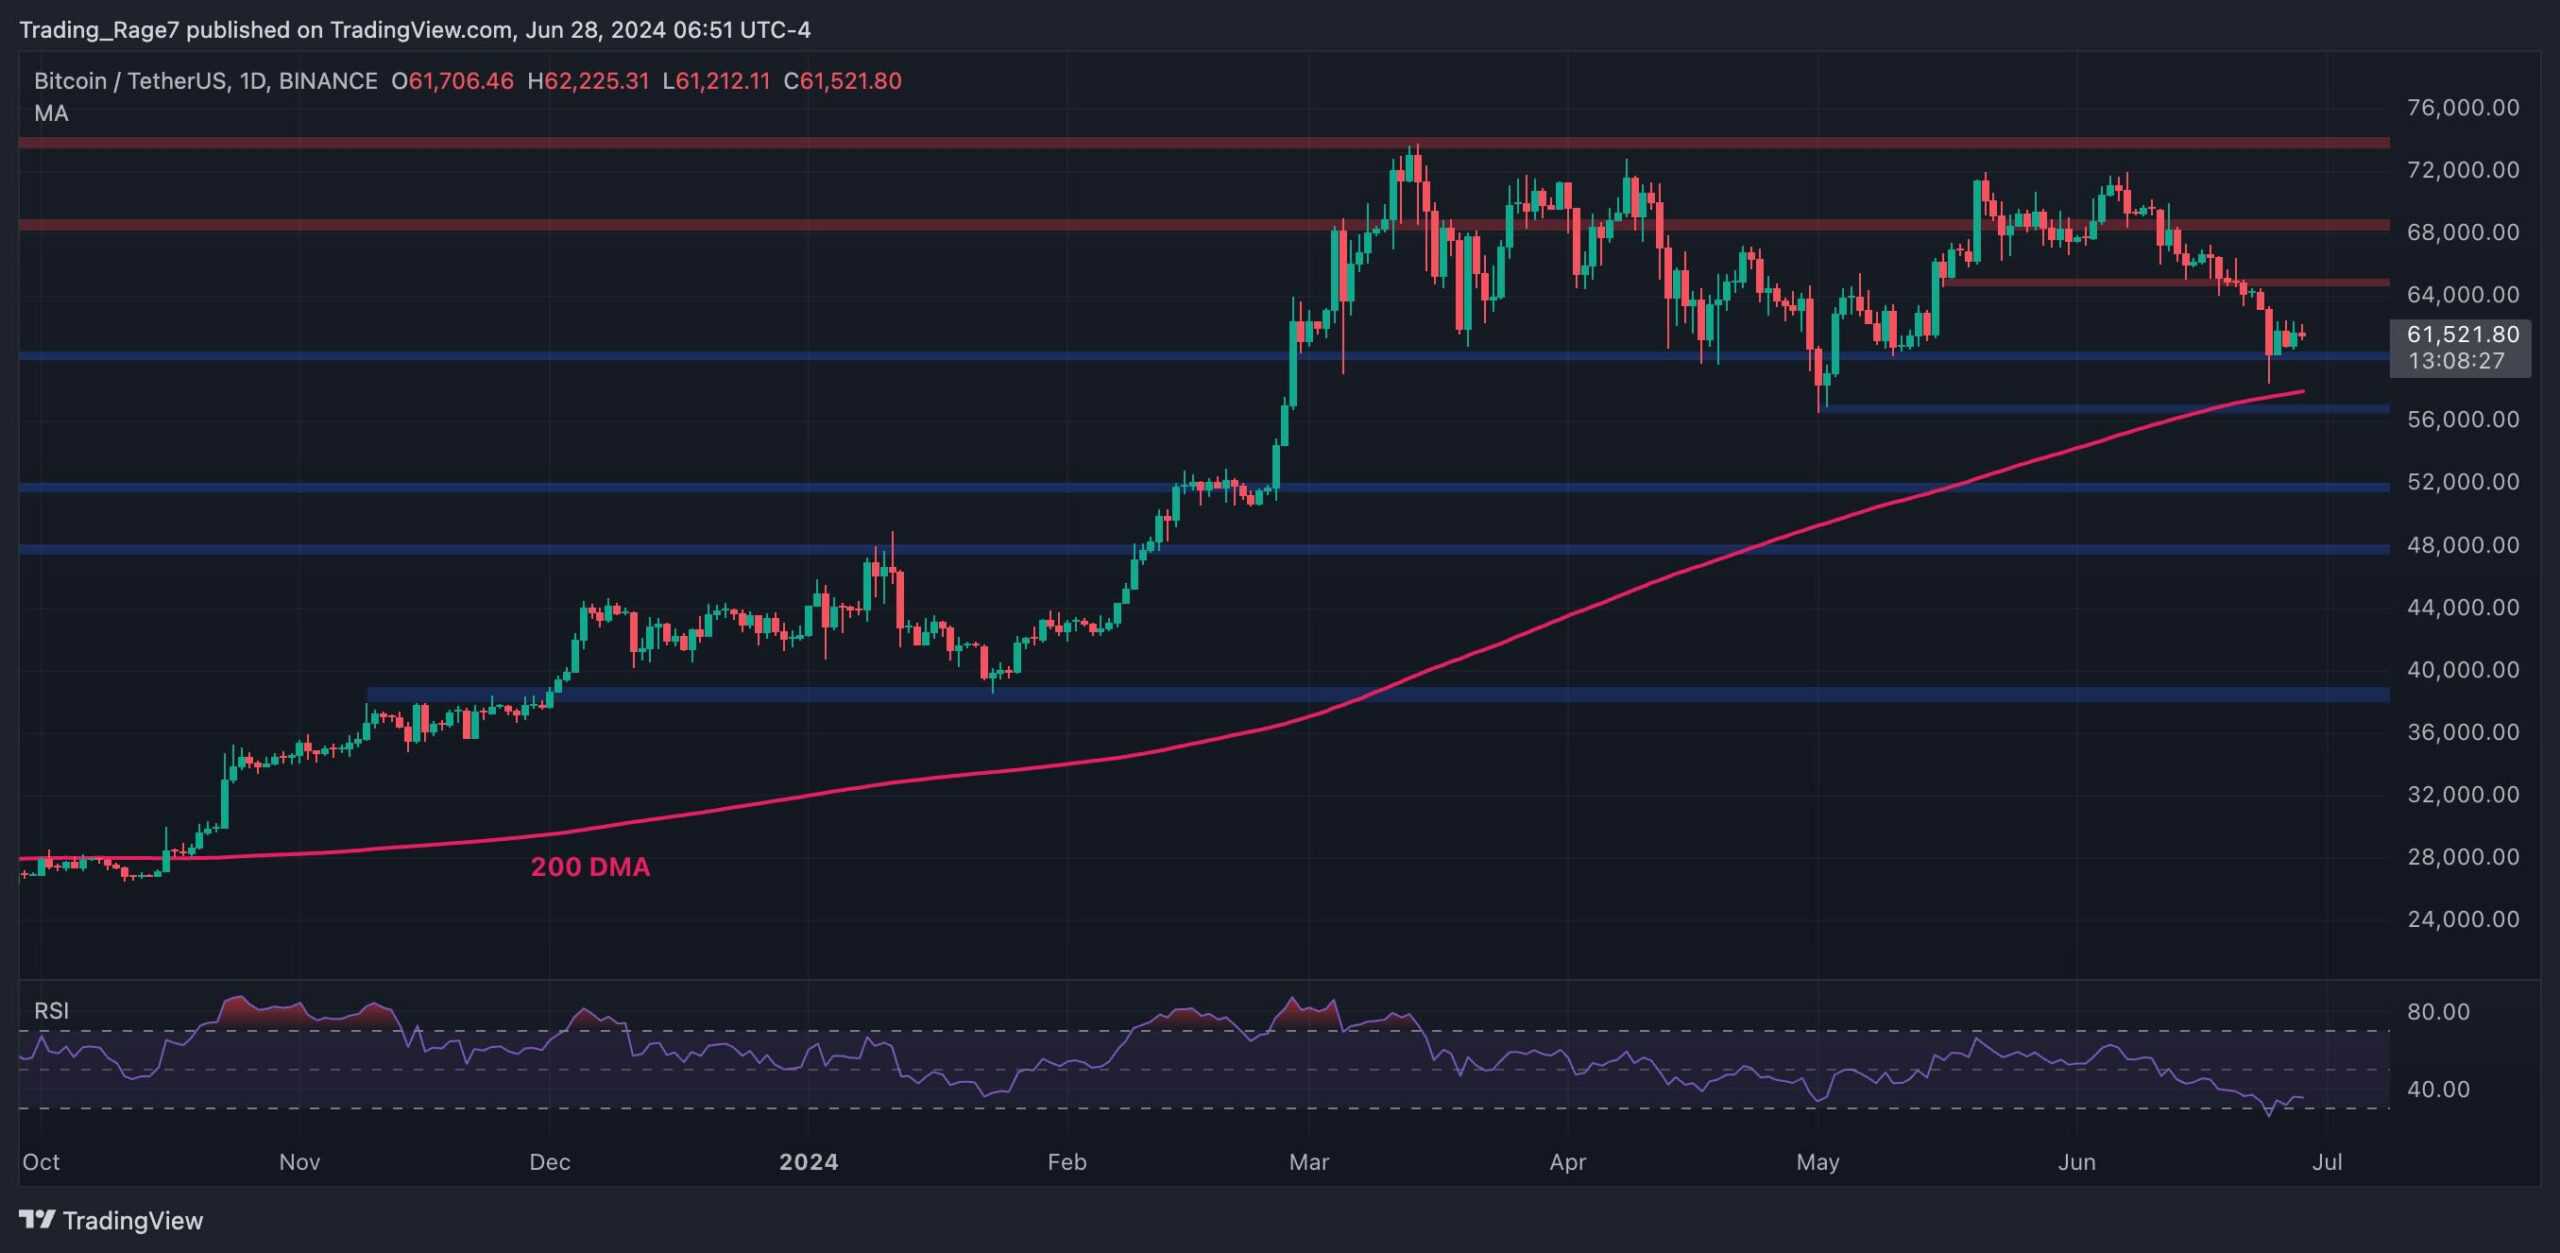 Bitcoin Price Analysis: Is BTC About to Crash Below $60K Again?